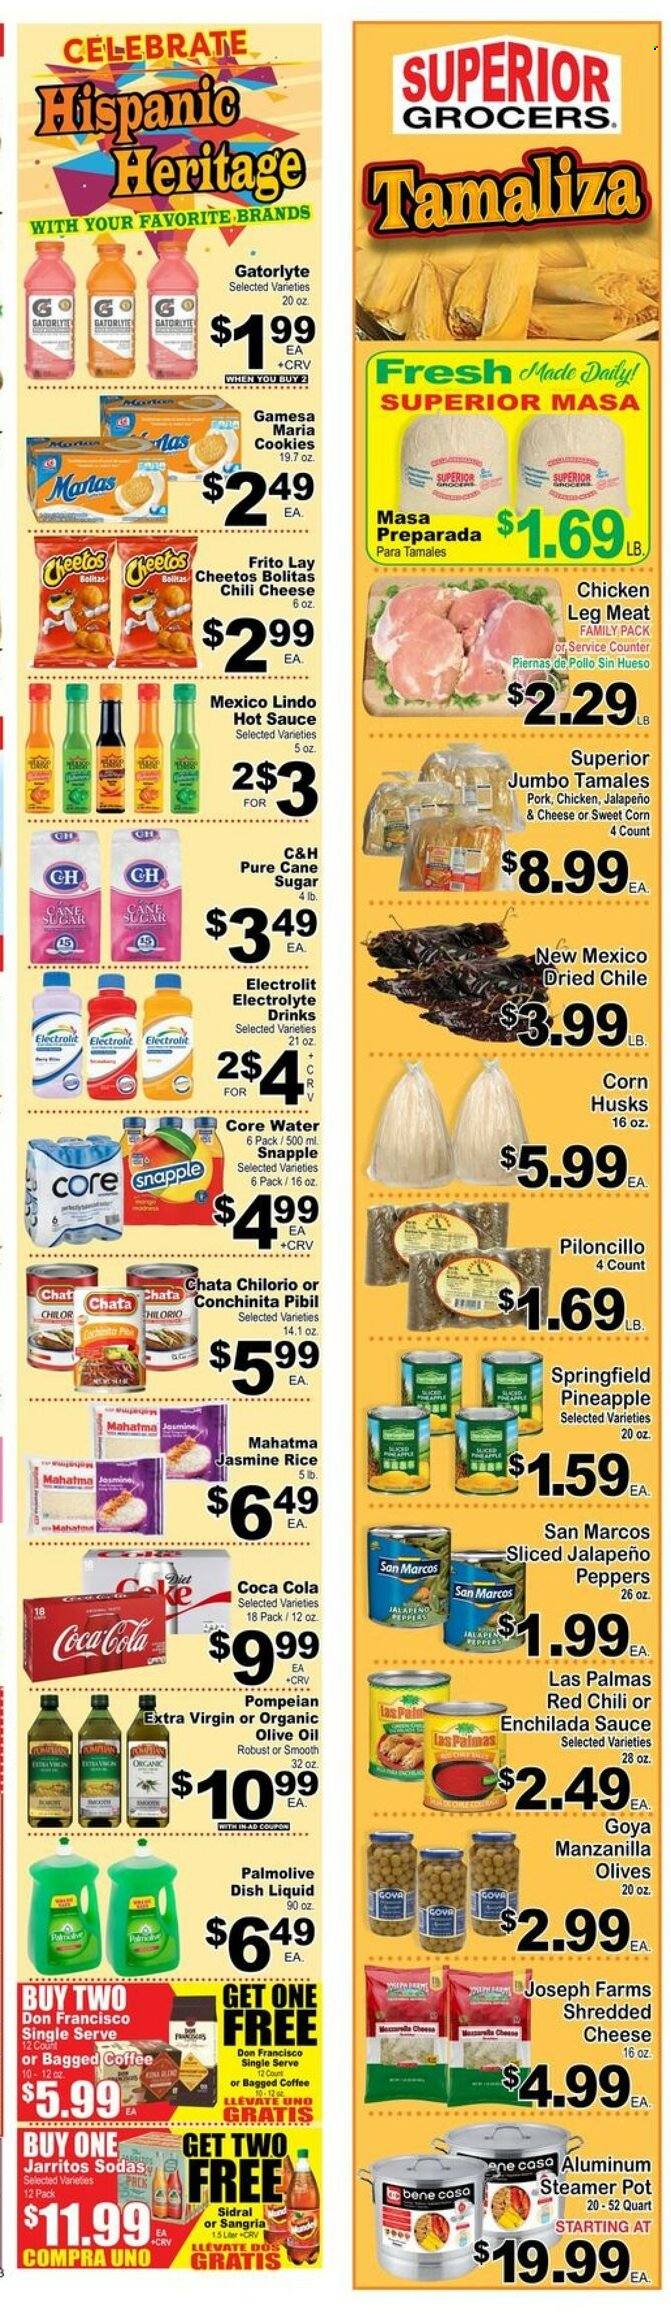 thumbnail - Superior Grocers Flyer - 09/28/2022 - 10/04/2022 - Sales products - corn, jalapeño, sweet corn, pineapple, chicken legs, sauce, shredded cheese, cookies, Cheetos, cane sugar, sugar, enchilada sauce, olives, Goya, rice, jasmine rice, hot sauce, extra virgin olive oil, olive oil, oil, Coca-Cola, Snapple, bagged coffee, Palmolive, pot. Page 5.